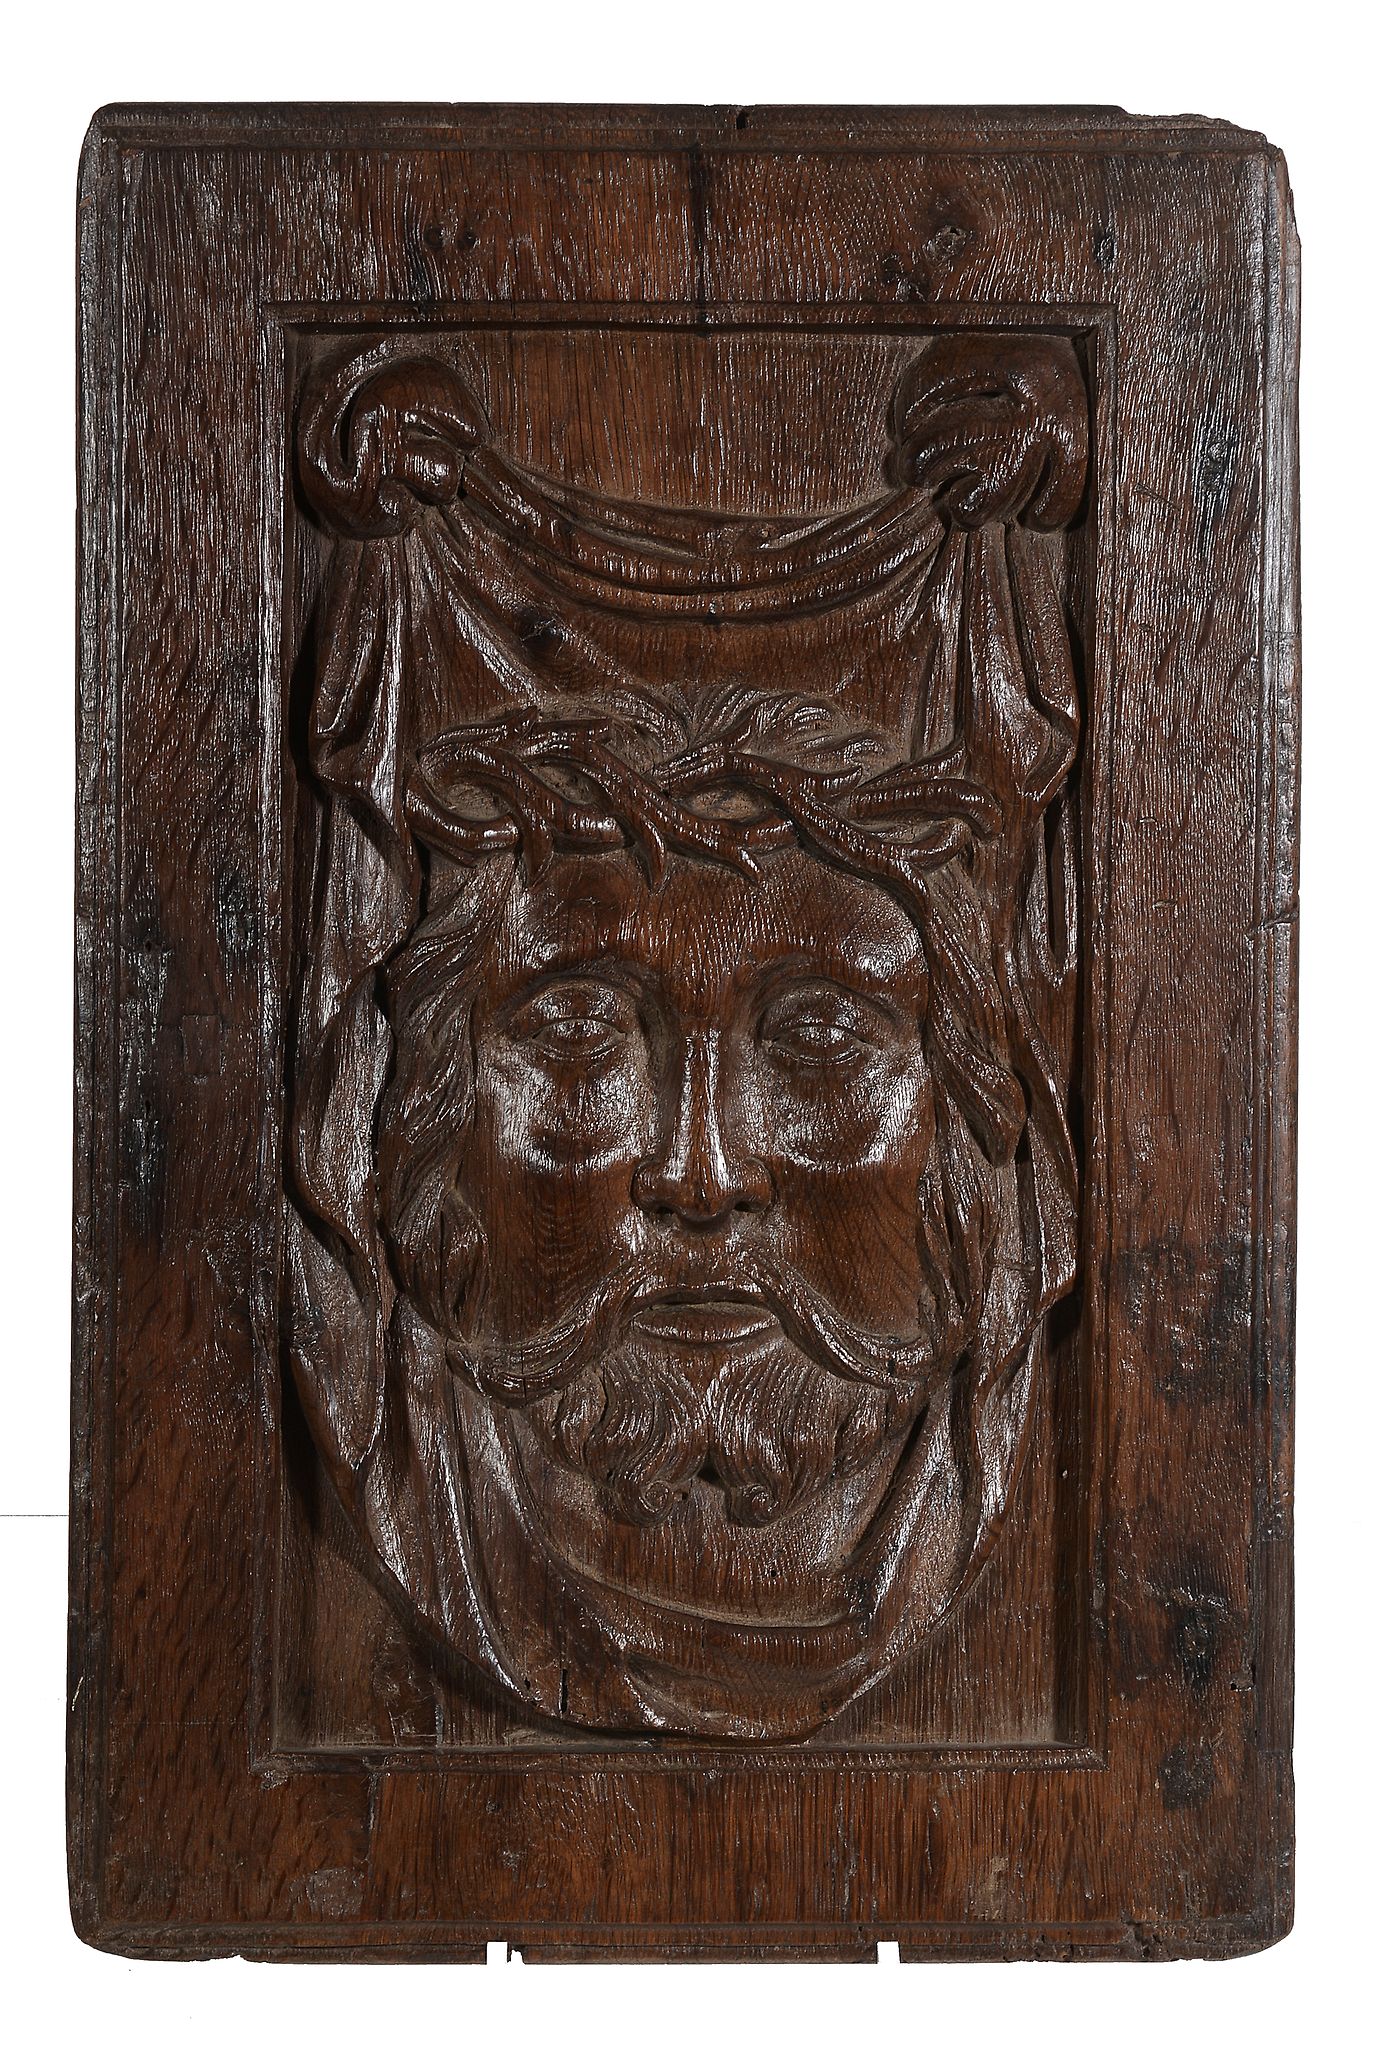 A recessed relief sculpted oak panel depicting the face of Christ, circa 1500 A recessed relief